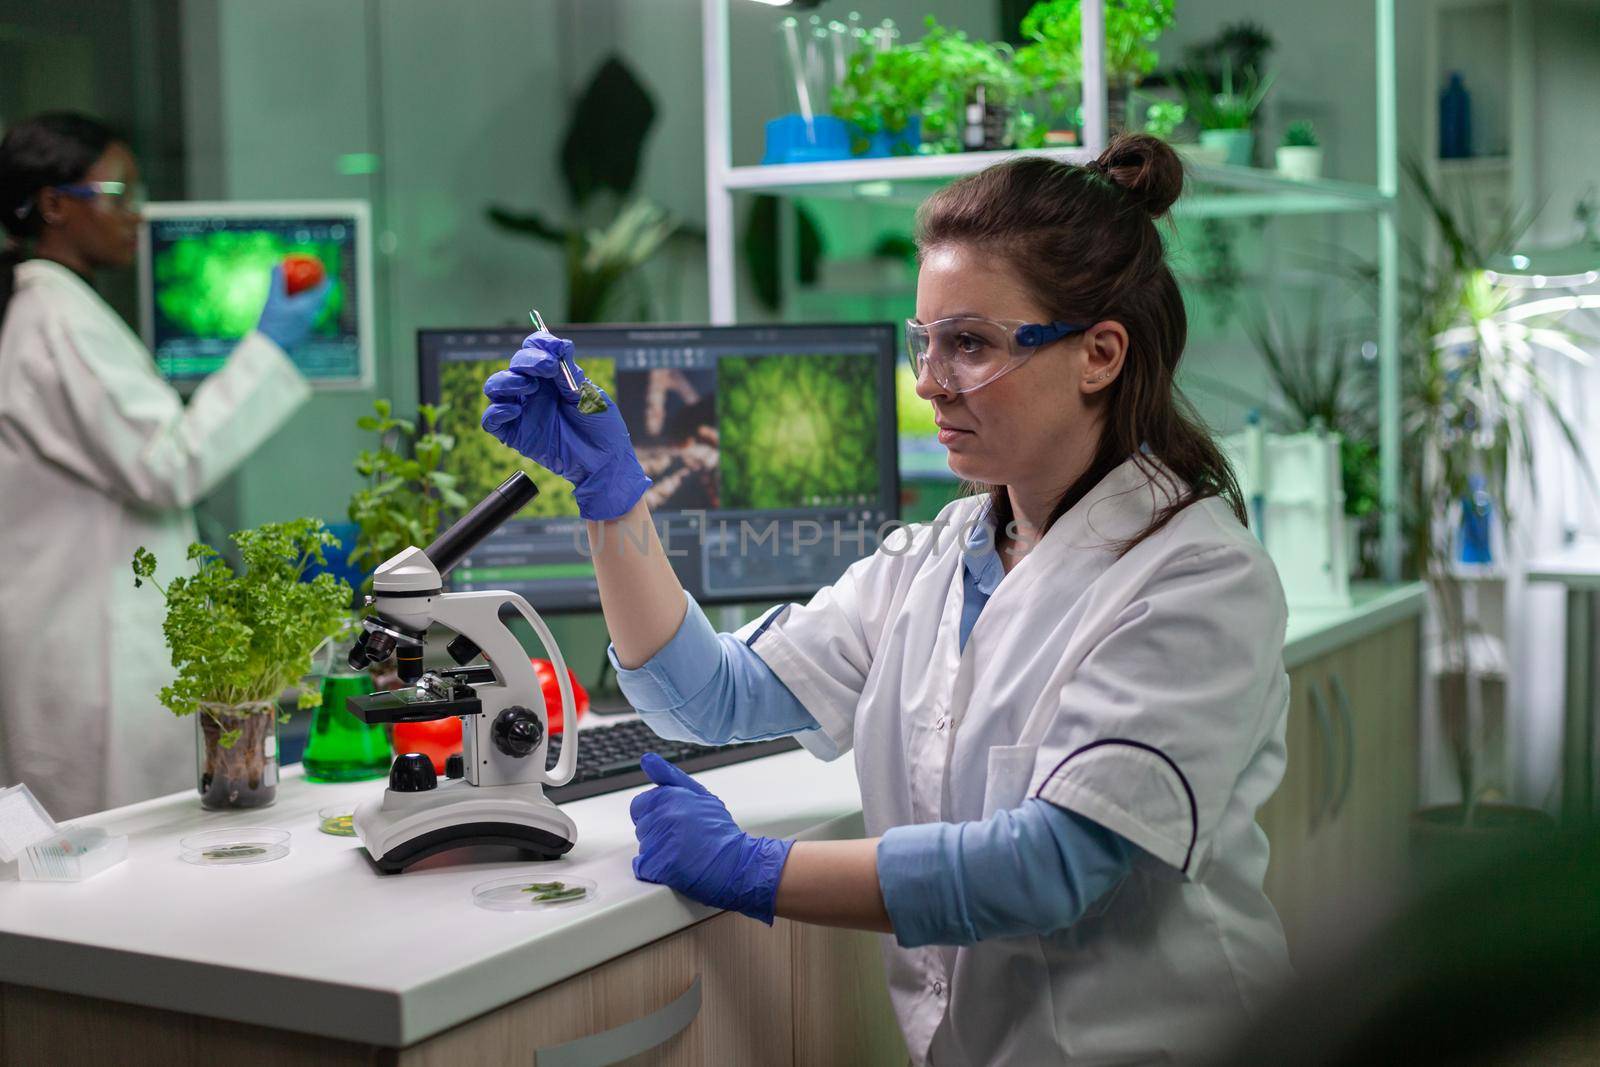 Scientist doctor analyzing botanical plants under microscope for chemical test. Biologist researcher specialist examining organic gmo leaf while working in pharmaceutical laboratory.